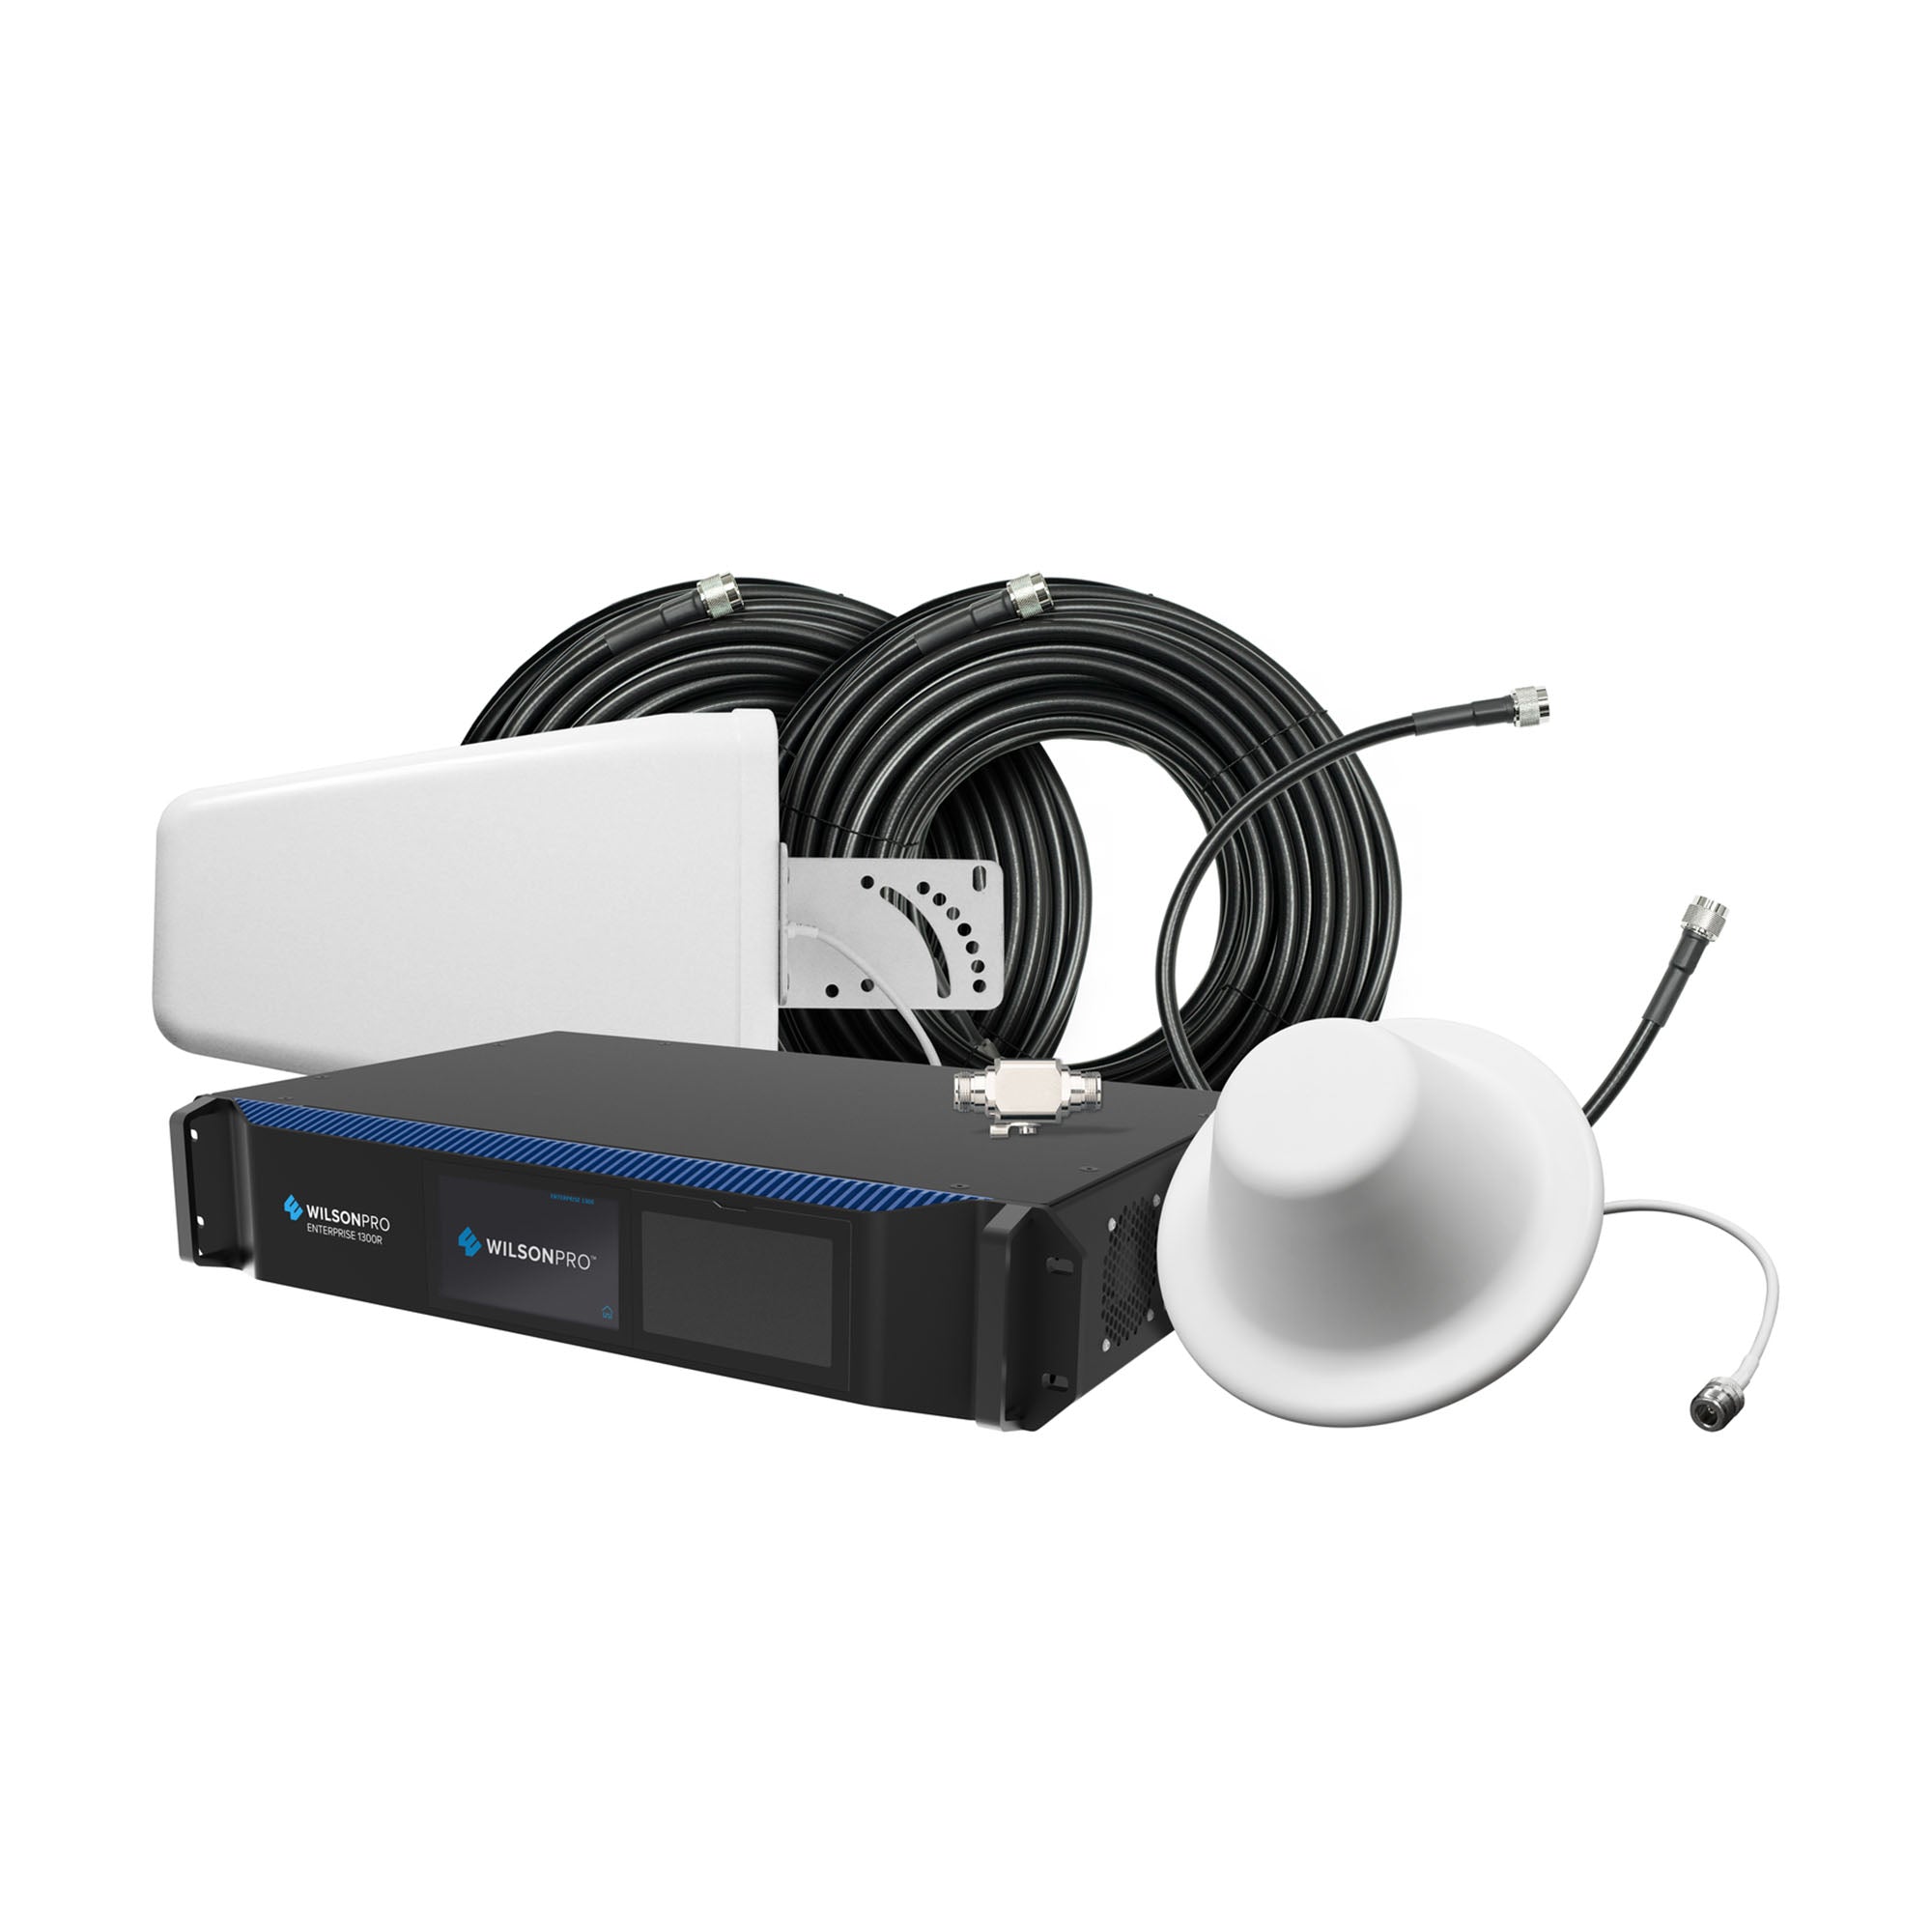 WilsonPro Enterprise 1300R Commercial In-Building Signal Booster Kit - 50 Ohm - Rack Mount Solution